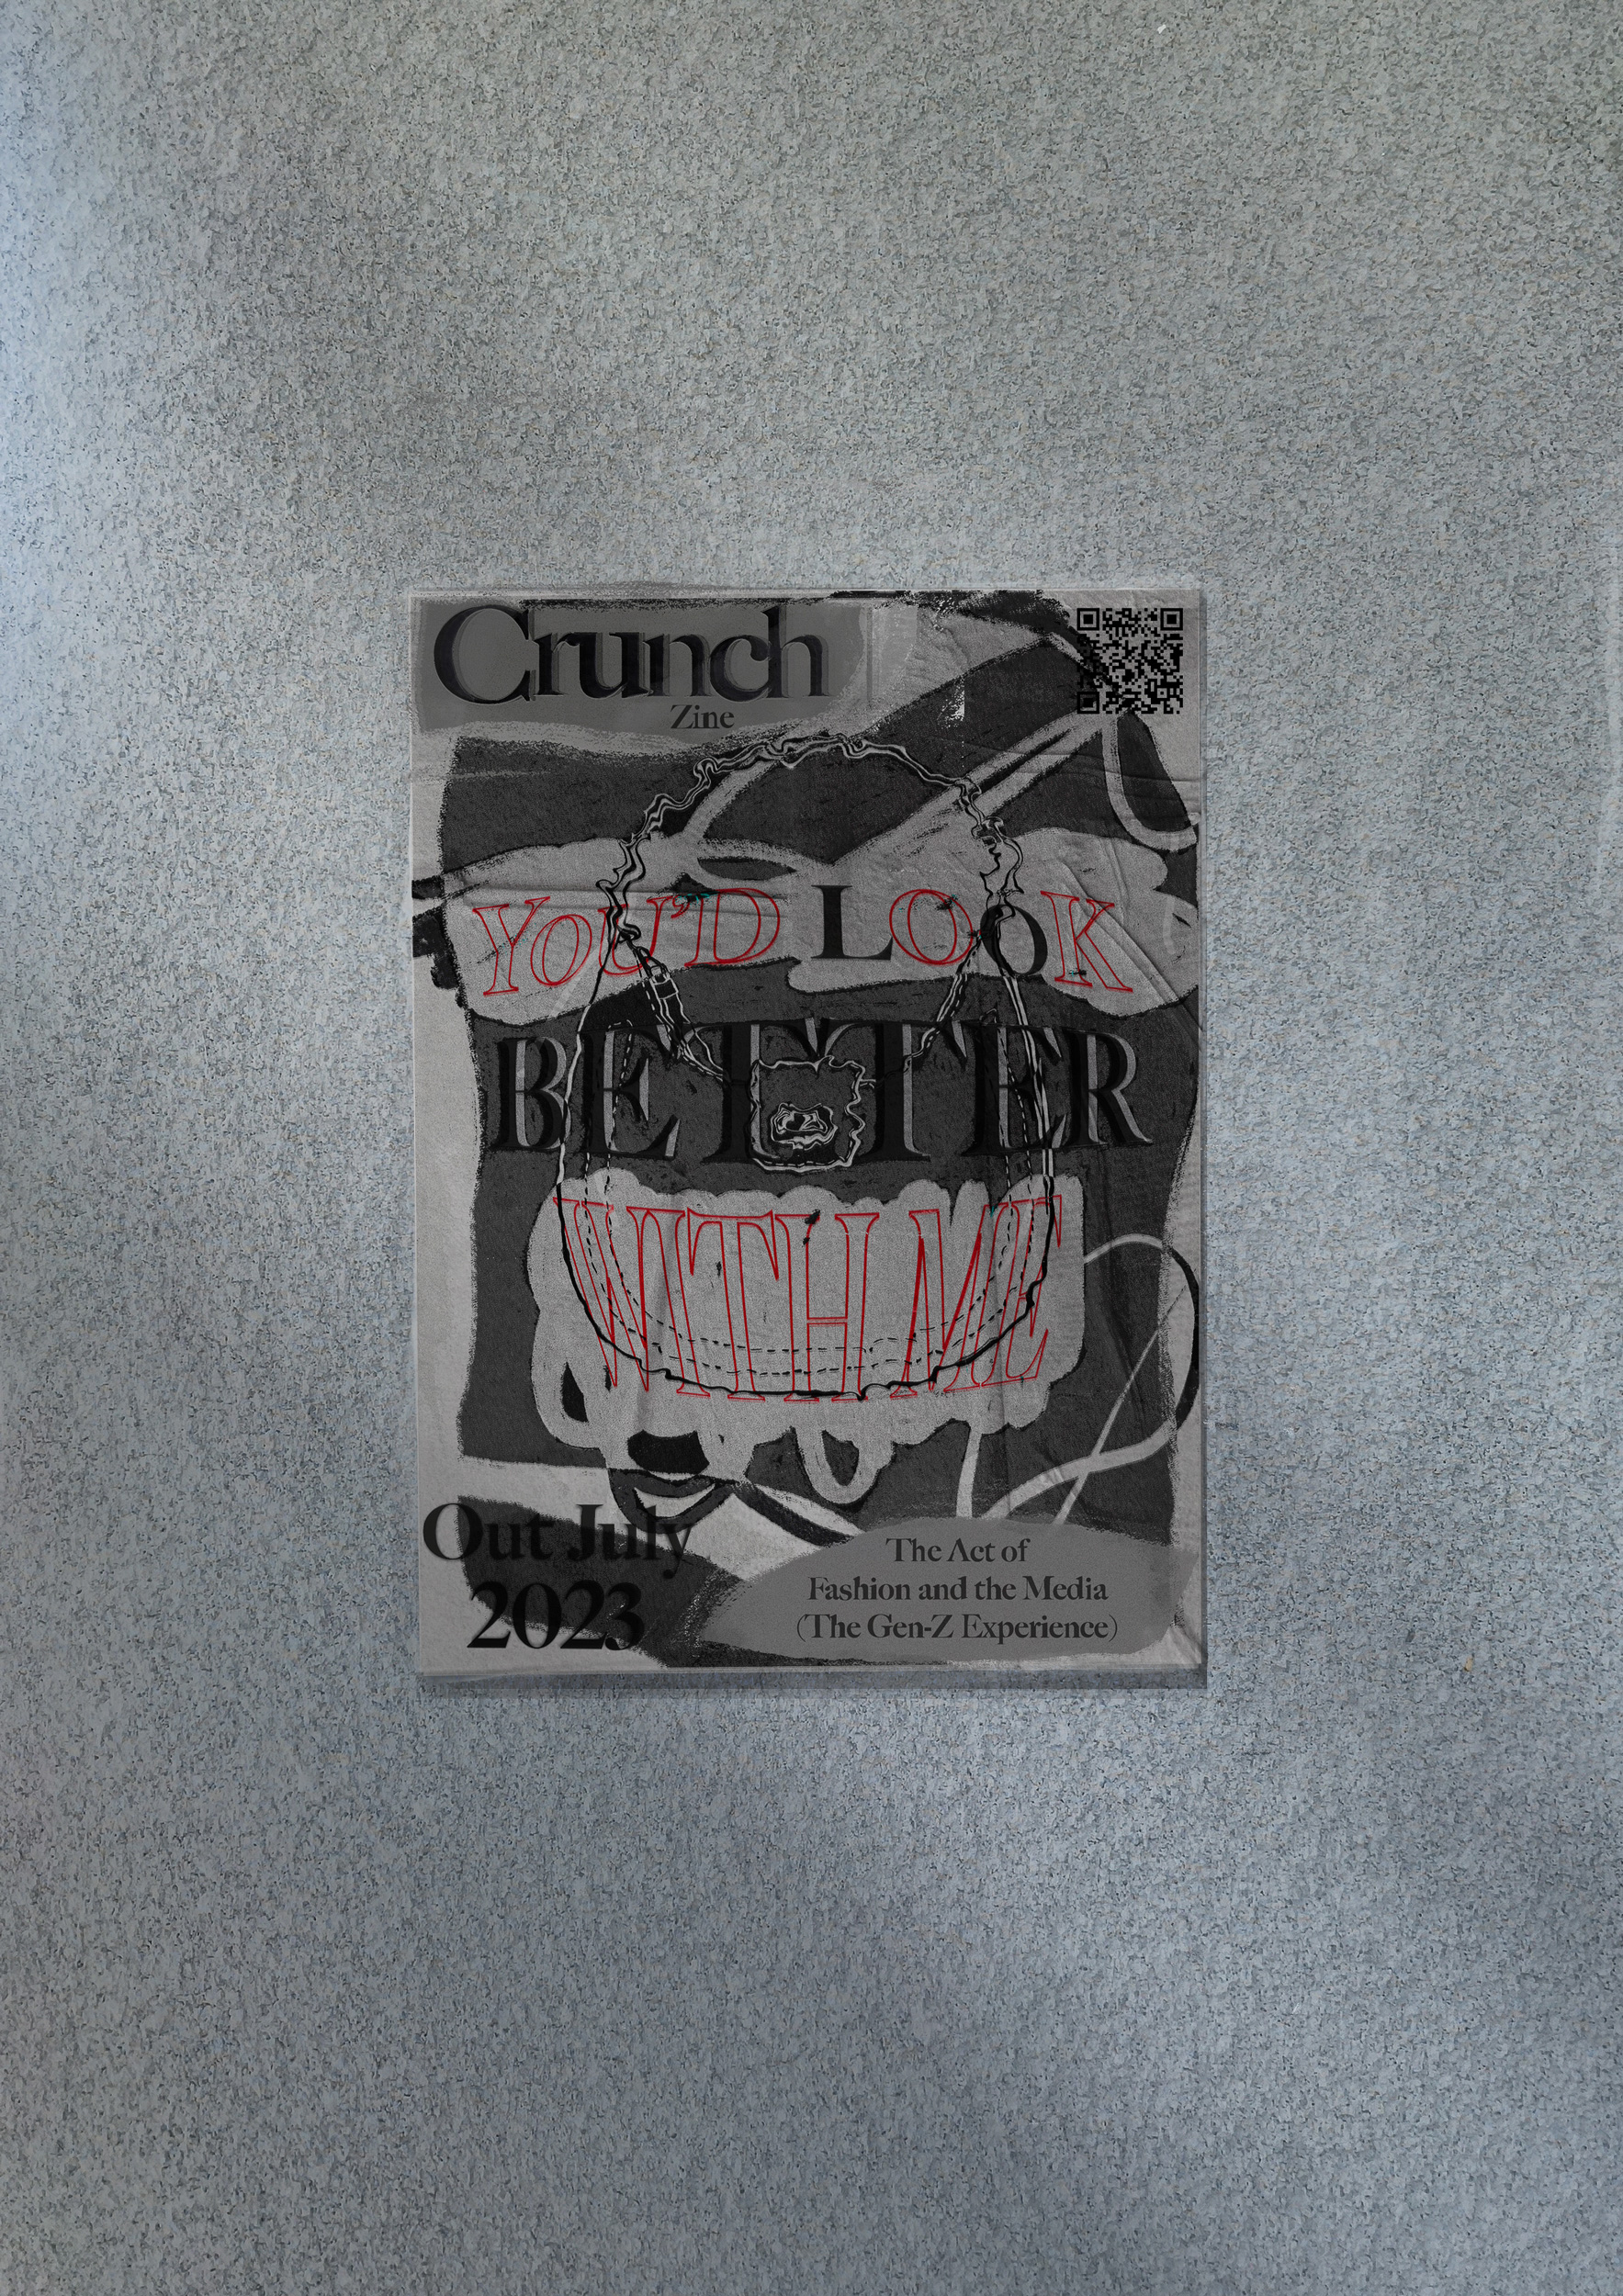 Graphical poster by Maisy Thorpe showing a gritted light grey wall with a grunge poster under the shadows of the sun - advertising 'Crunch' zine